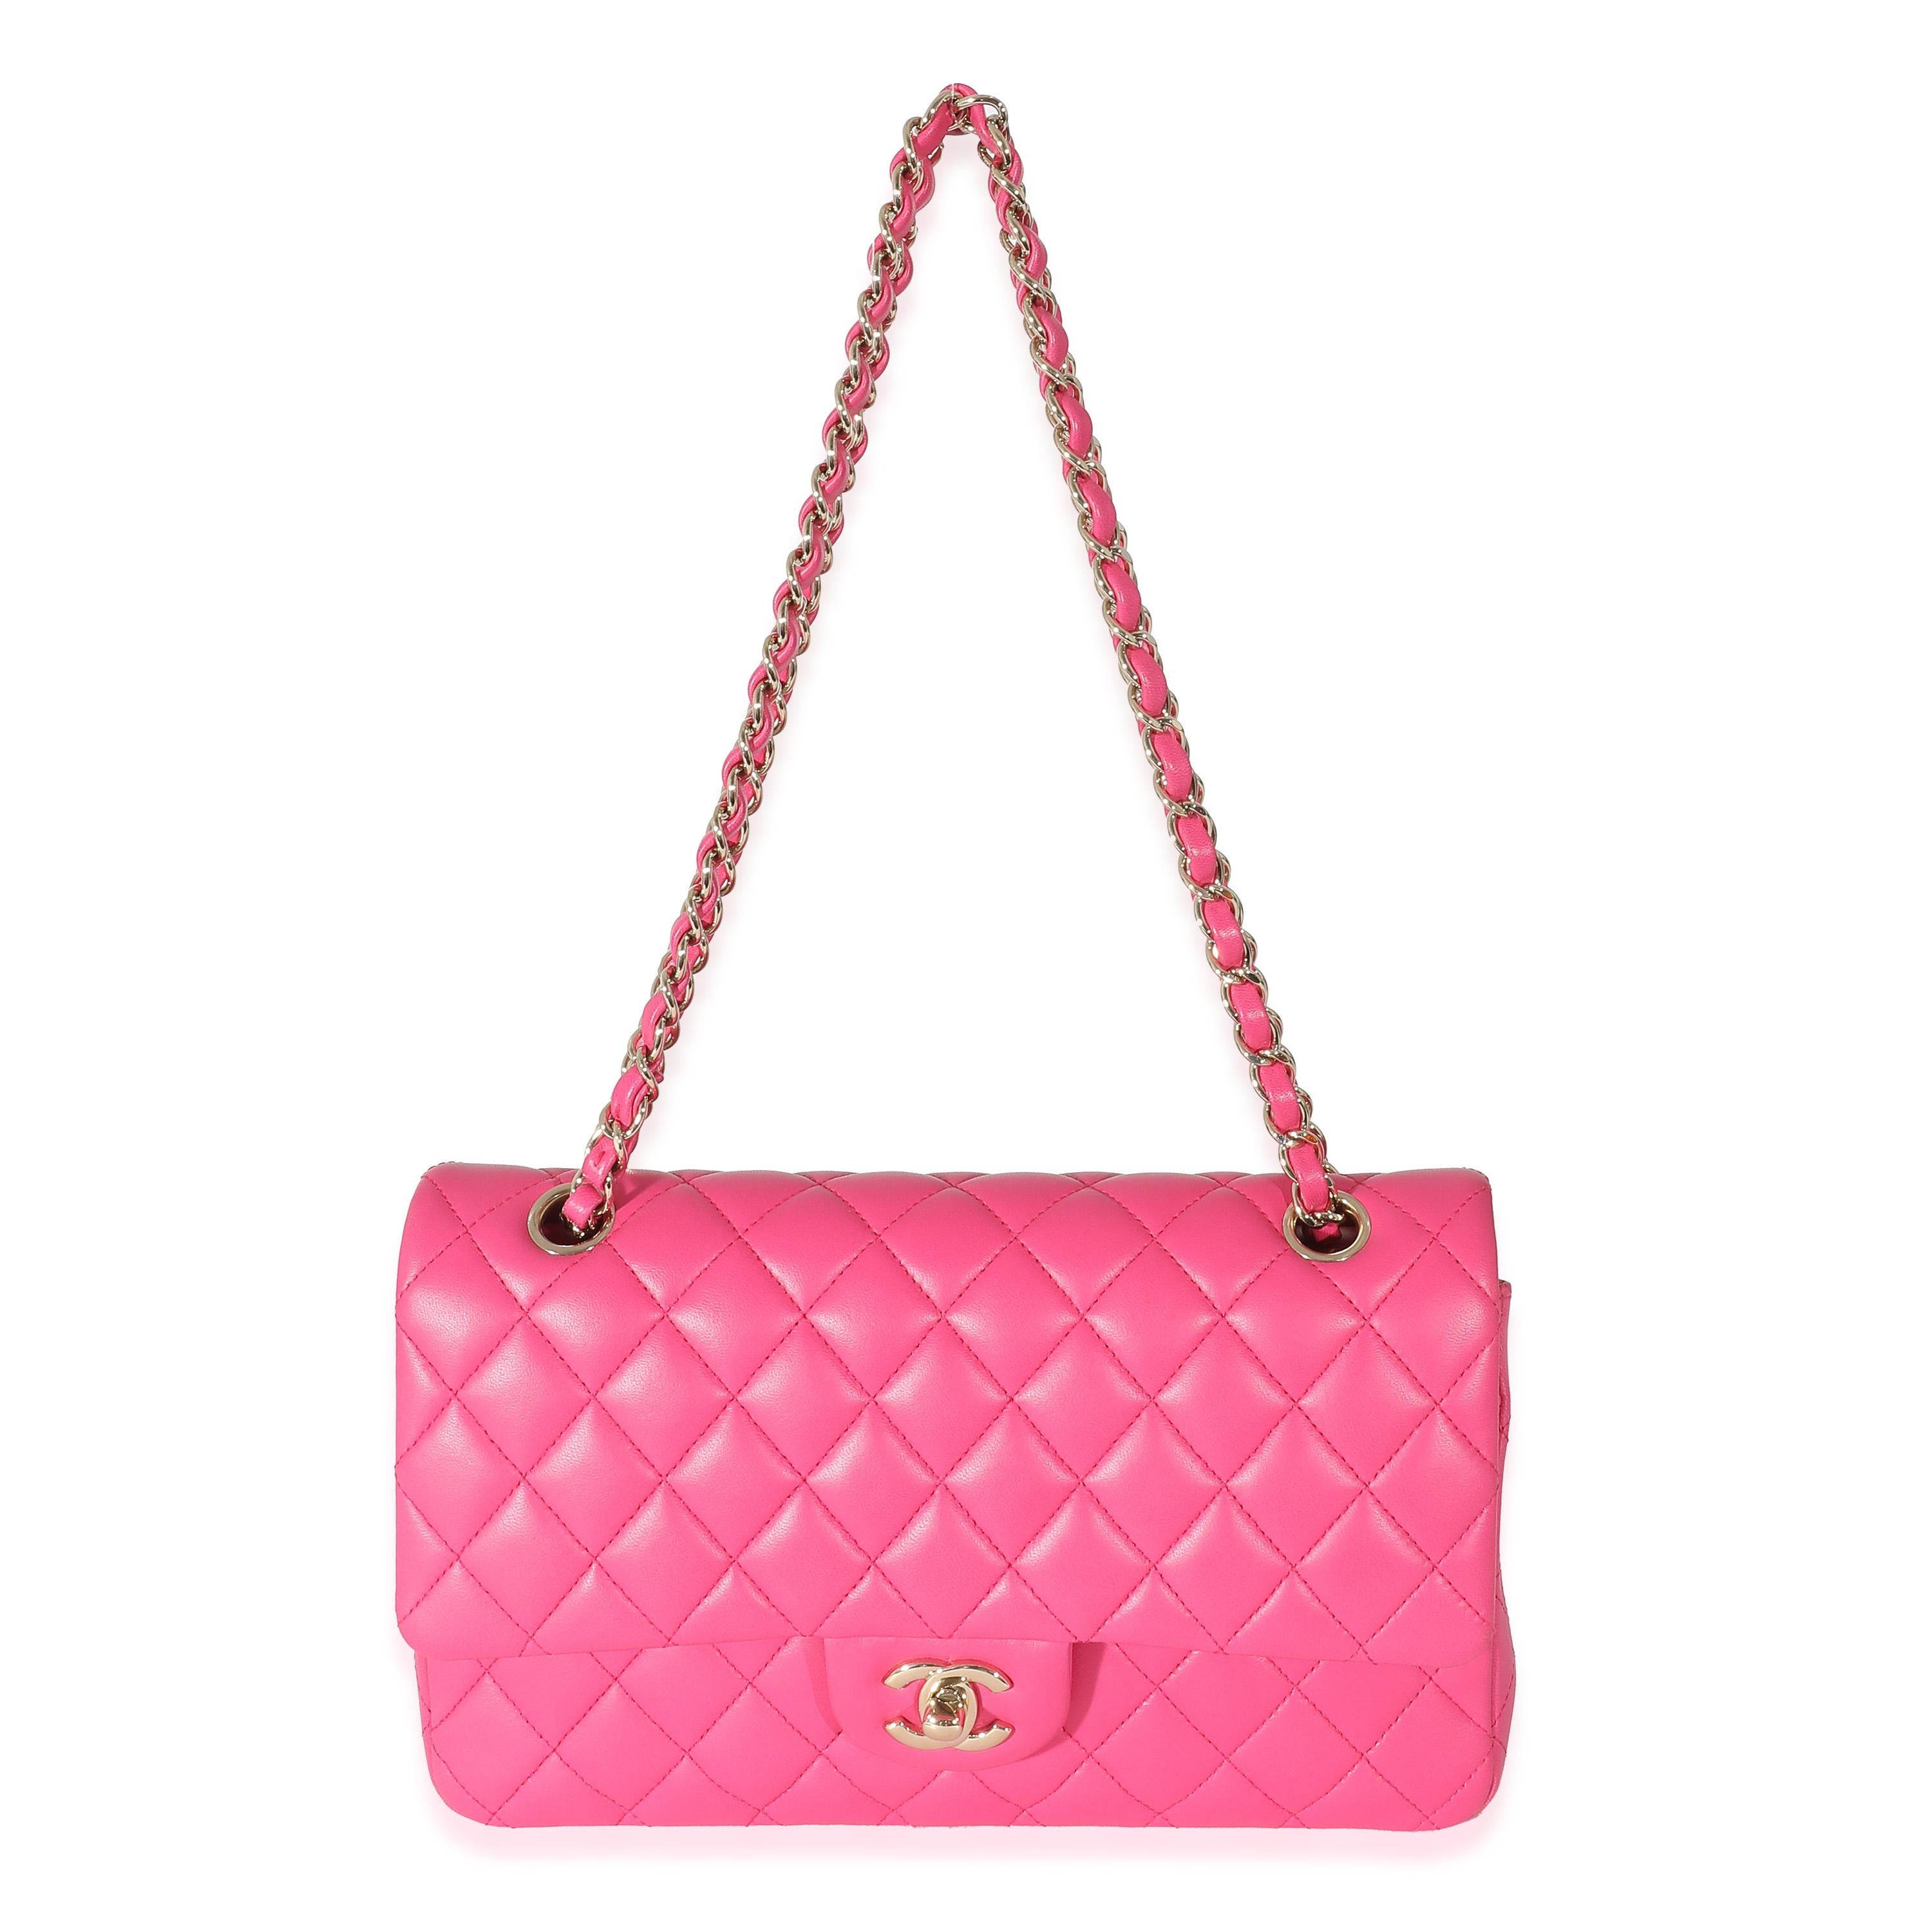 Listing Title: Chanel 16C Pink Quilted Lambskin Medium Classic Double Flap Bag
SKU: 133879
Condition: Pre-owned 
Handbag Condition: Very Good
Condition Comments: Item is in very good condition with minor signs of wear. Light scuffing along corners